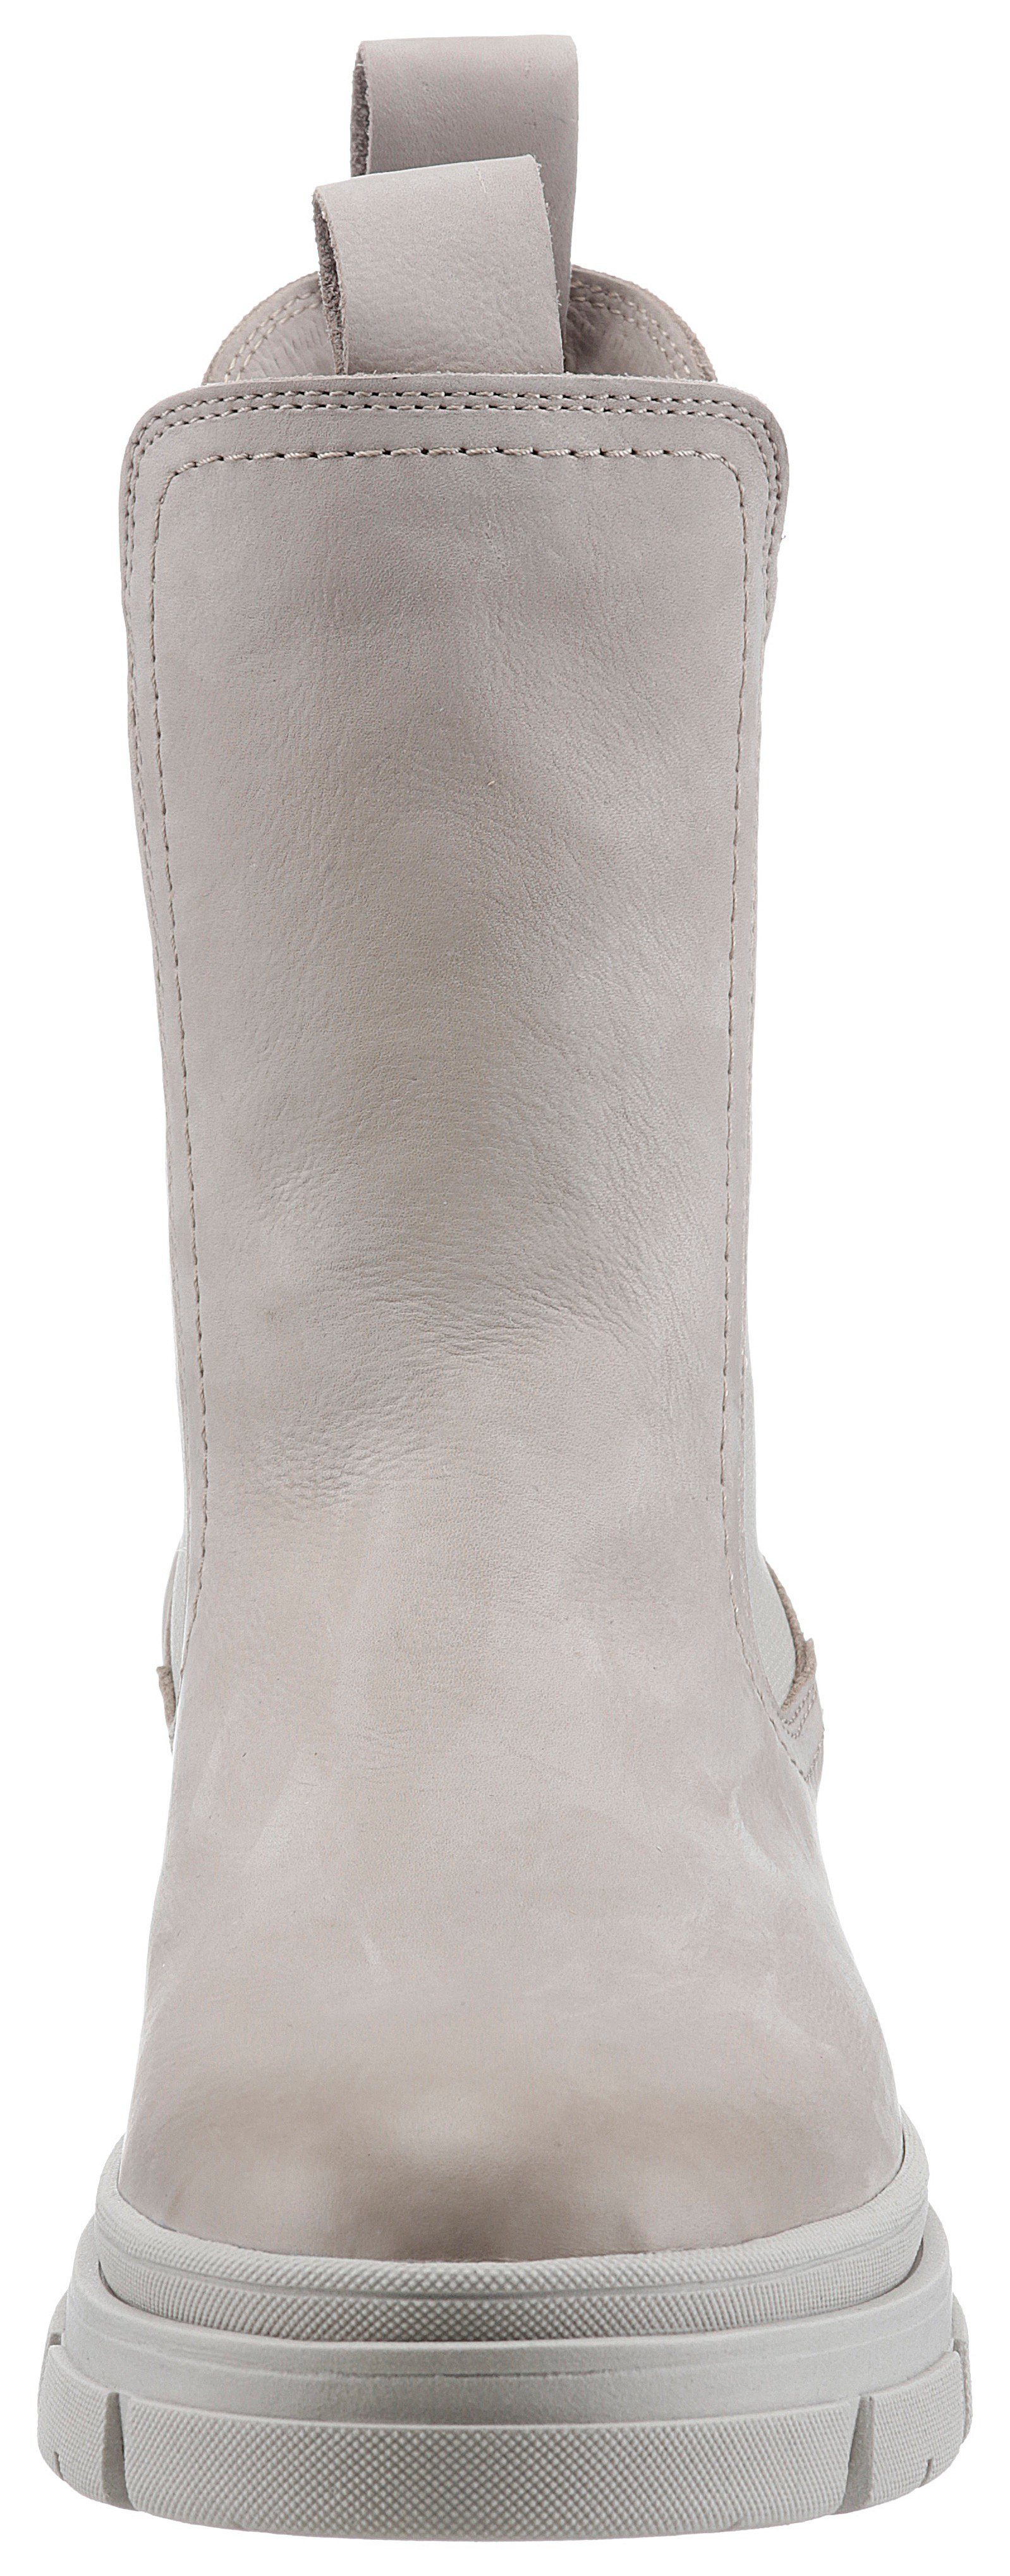 Tamaris Chelseaboots Form in bequemer taupe